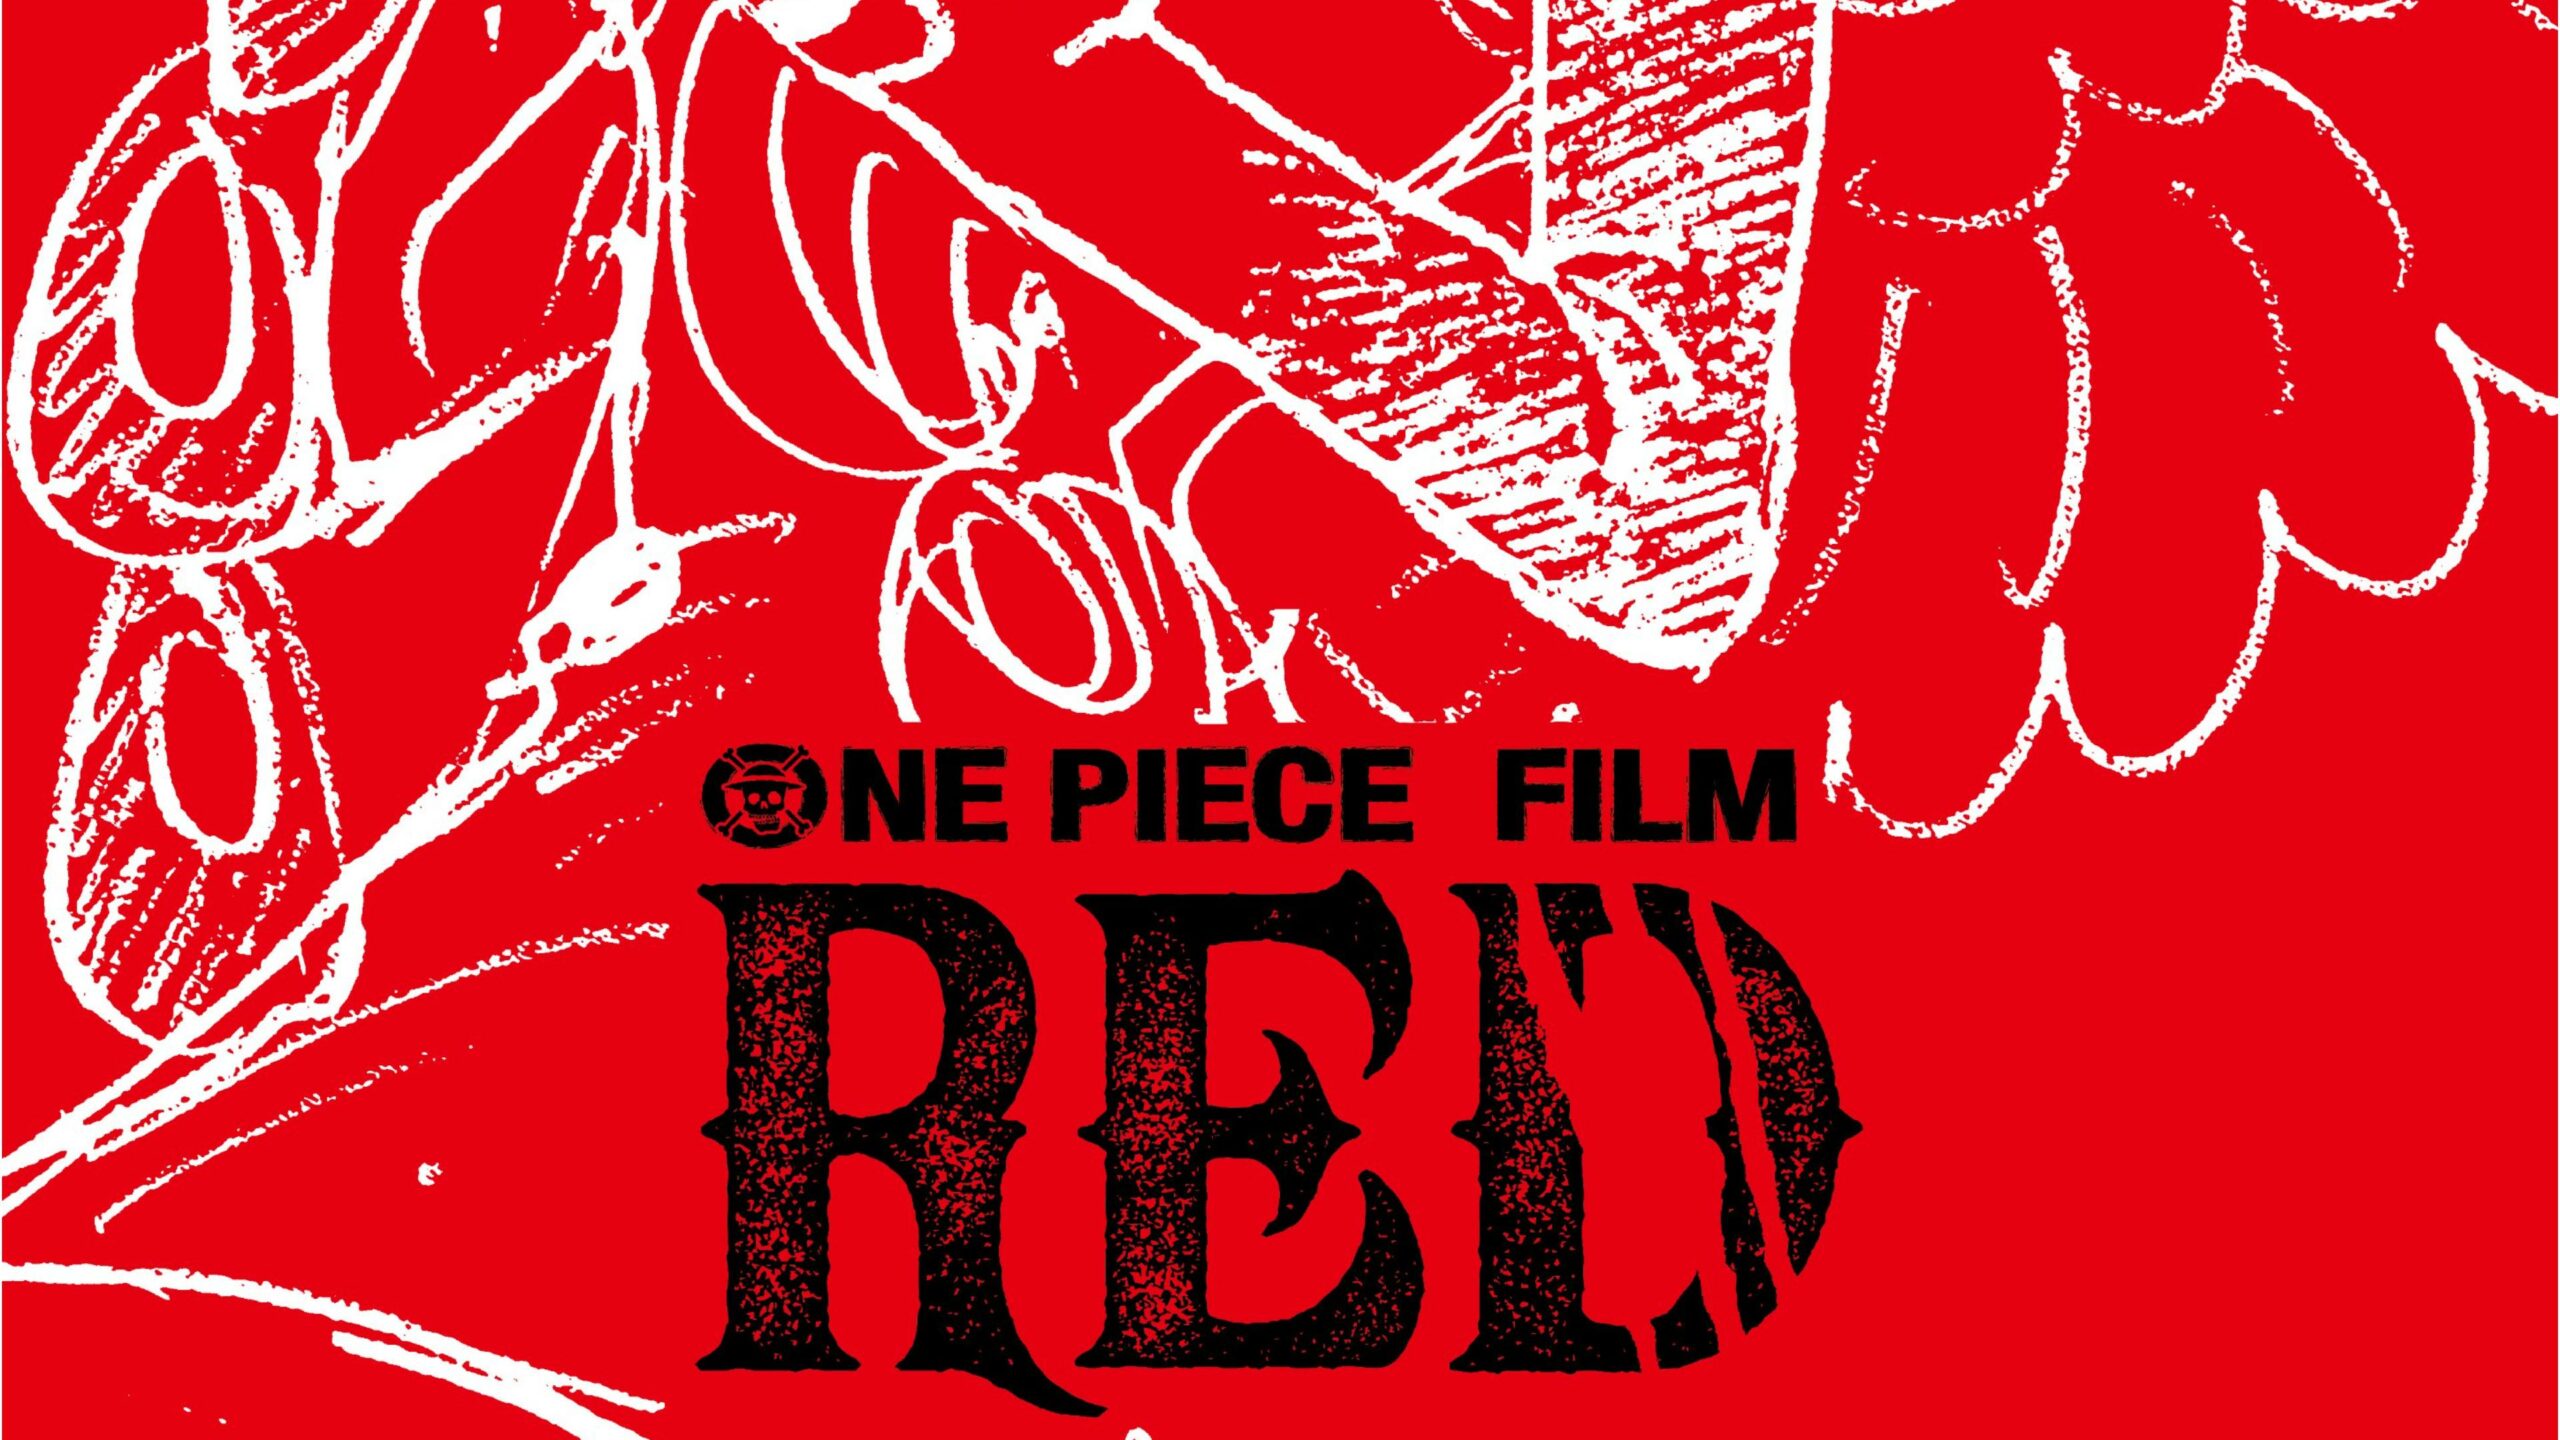 One Piece 'Red' Film Gets First Teaser PV With Official Release Date